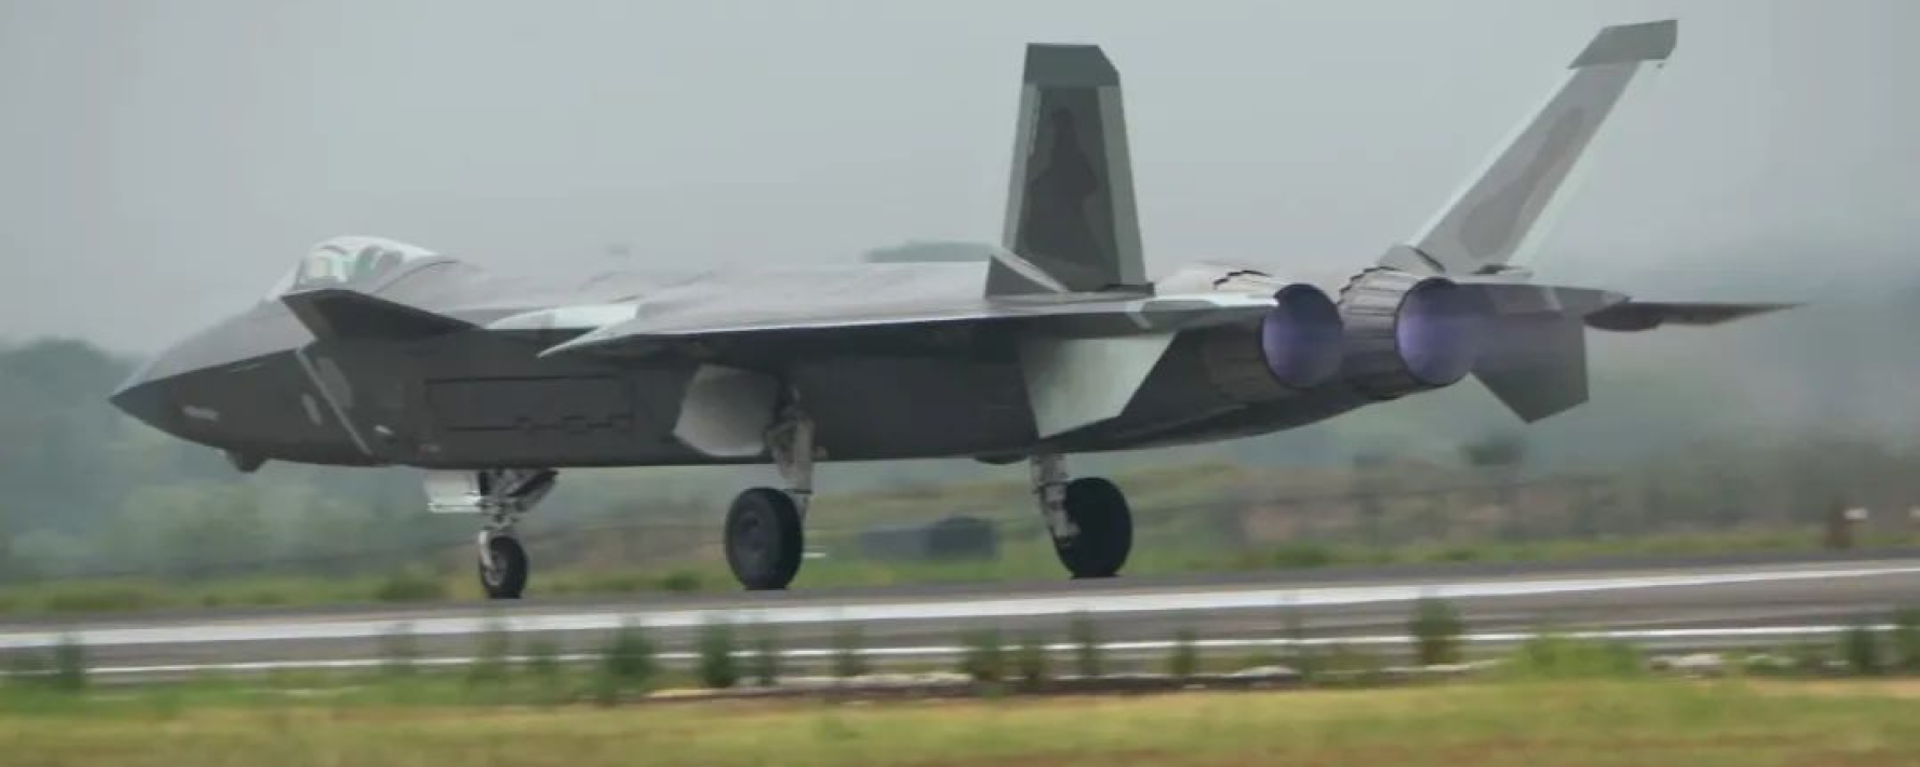 A J-20 stealth fighter of China's People's Liberation Army Air Force (PLAAF) takes part in drills near Taiwan on August 3, 2022. - Sputnik International, 1920, 27.10.2022